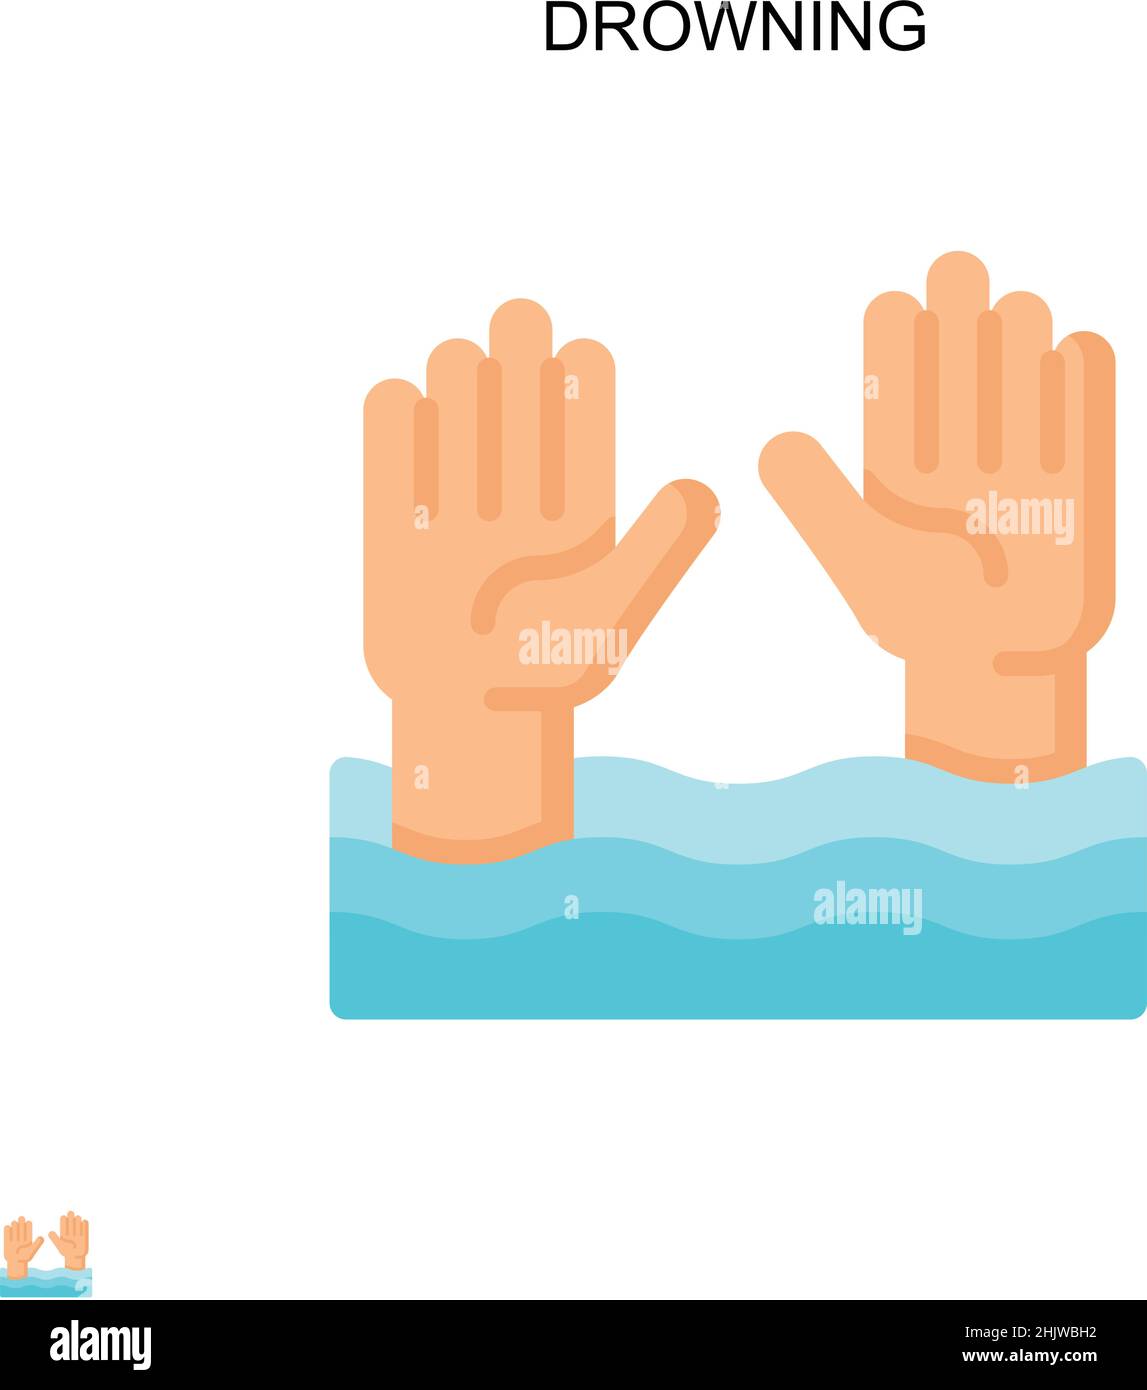 Drowning Simple vector icon. Illustration symbol design template for web mobile UI element. Stock Vector